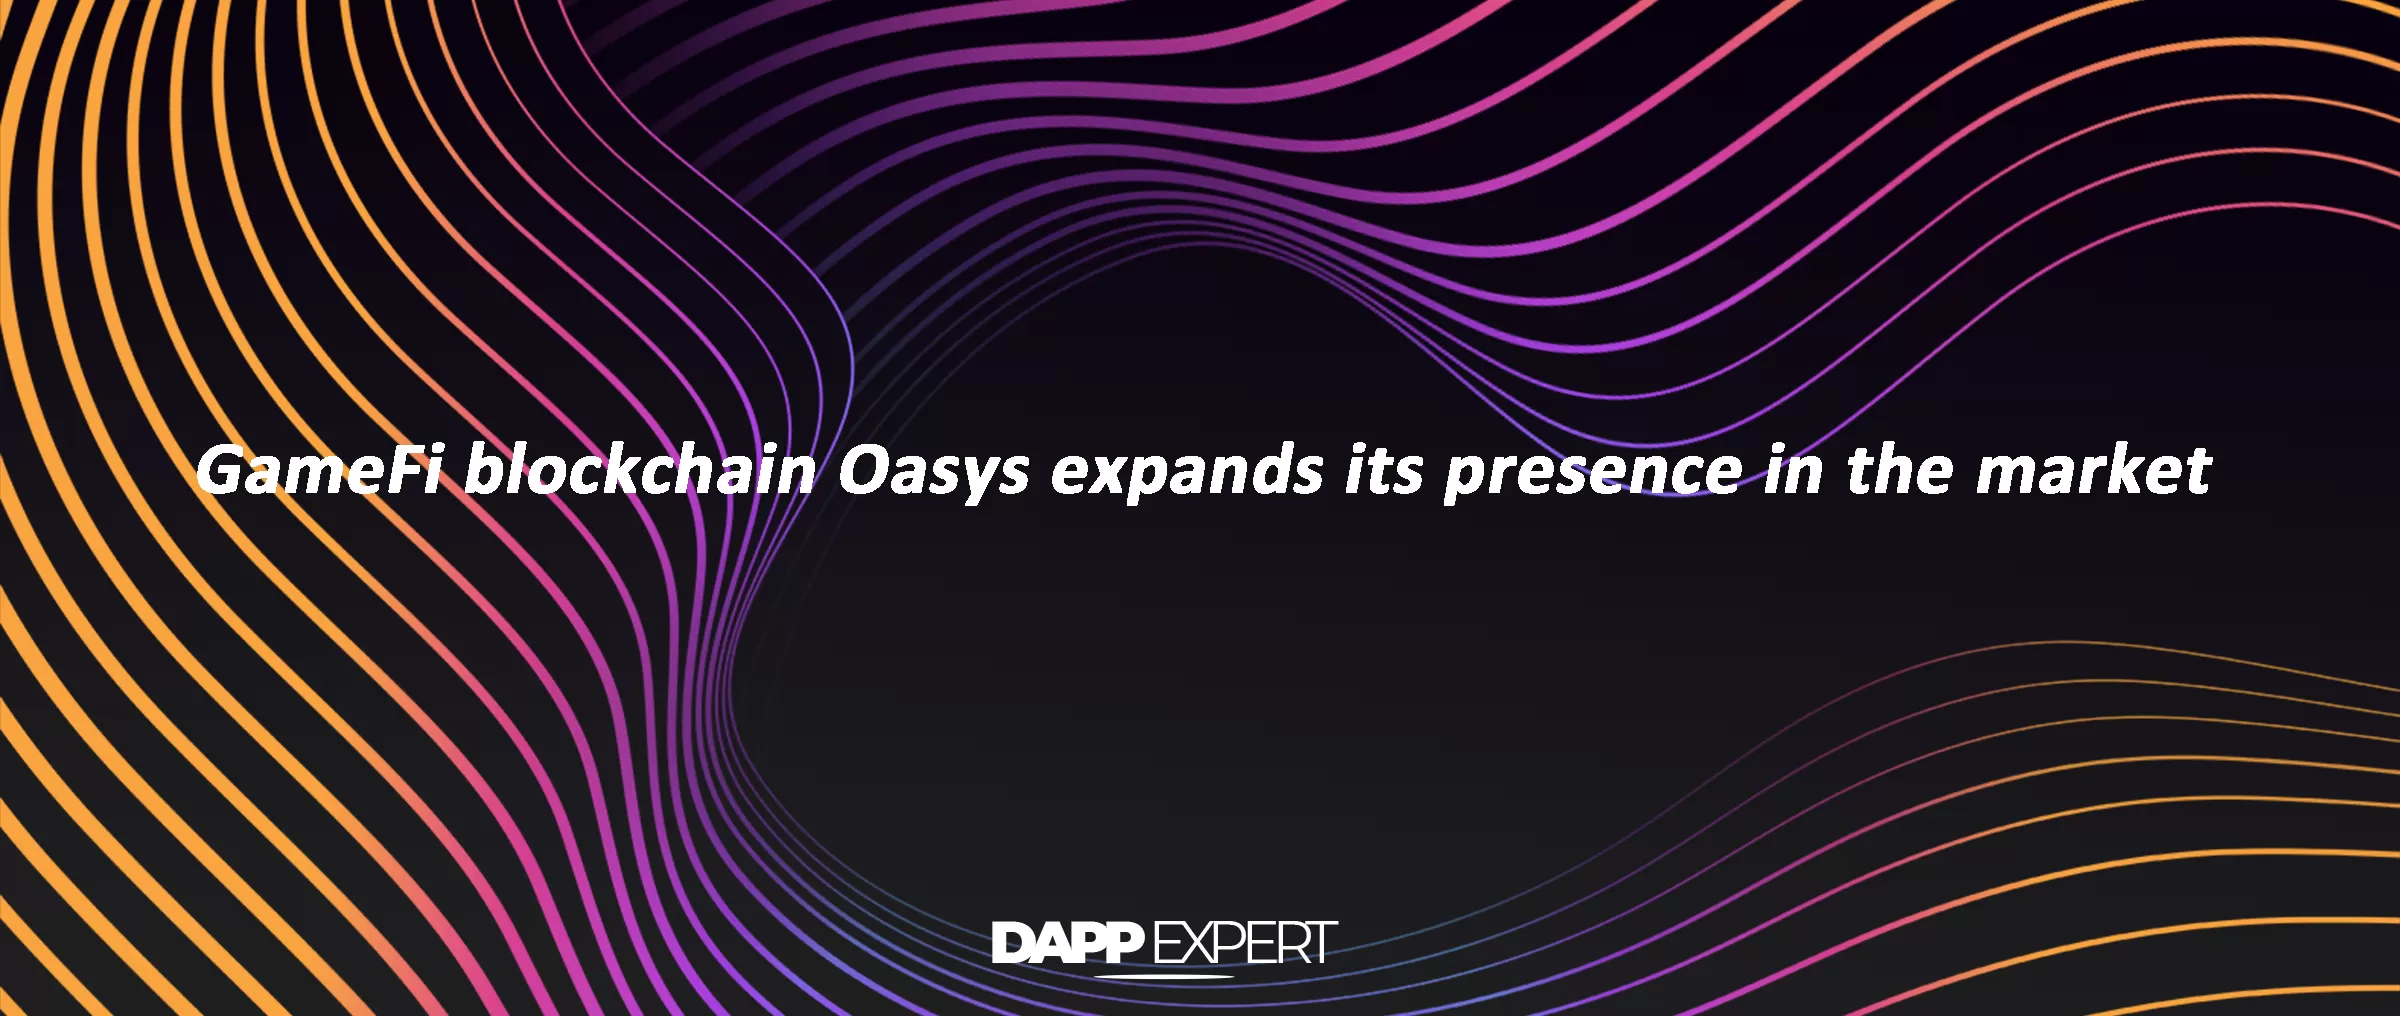 GameFi blockchain Oasys expands its presence in the market